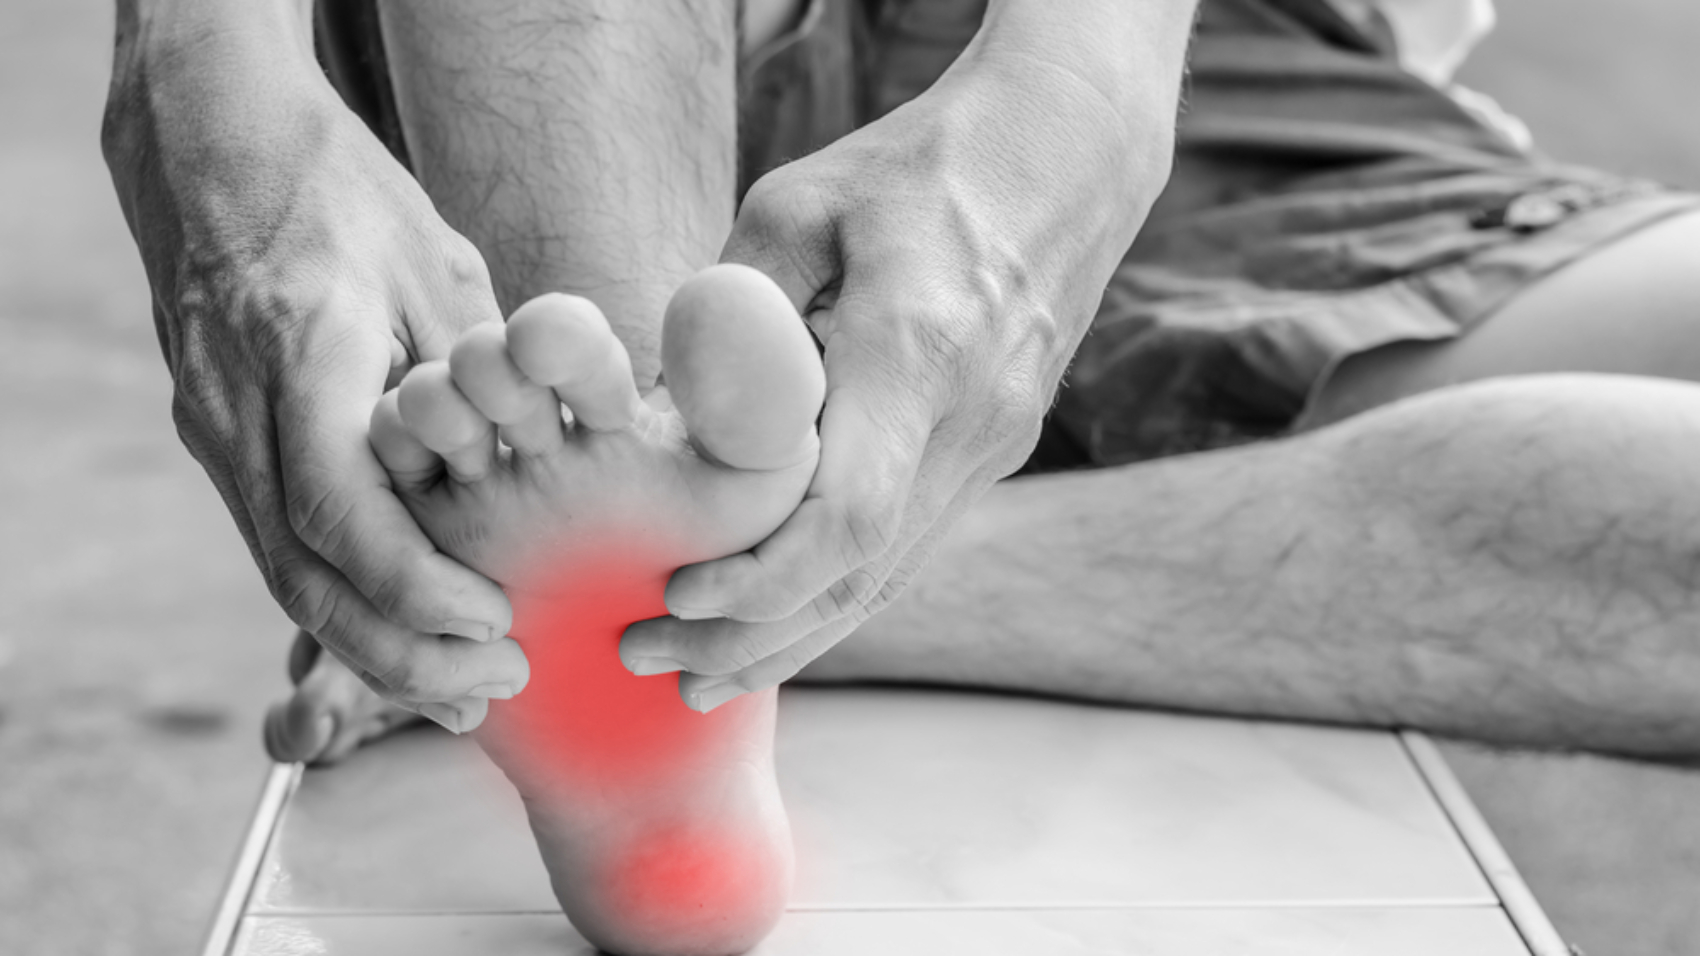 2-December-Constant-Foot-Pain-Blog-Walking-Mobility-Clinics